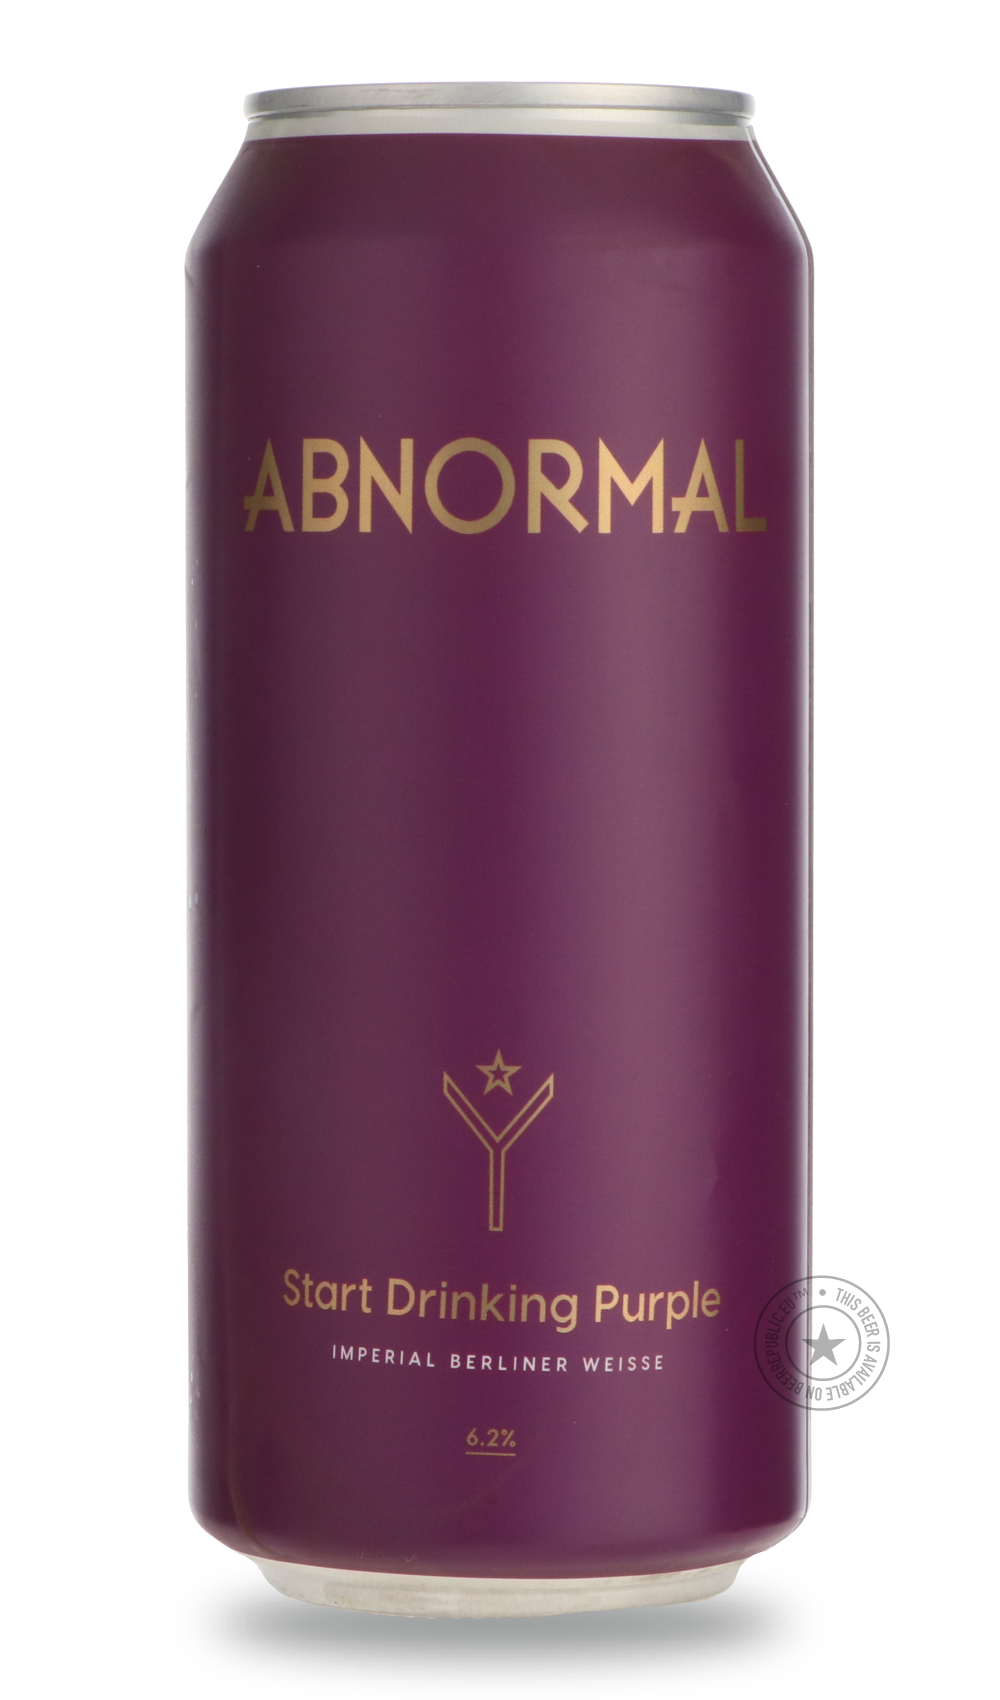 -Abnormal- Start Drinking Purple-Sour / Wild & Fruity- Only @ Beer Republic - The best online beer store for American & Canadian craft beer - Buy beer online from the USA and Canada - Bier online kopen - Amerikaans bier kopen - Craft beer store - Craft beer kopen - Amerikanisch bier kaufen - Bier online kaufen - Acheter biere online - IPA - Stout - Porter - New England IPA - Hazy IPA - Imperial Stout - Barrel Aged - Barrel Aged Imperial Stout - Brown - Dark beer - Blond - Blonde - Pilsner - Lager - Wheat - 